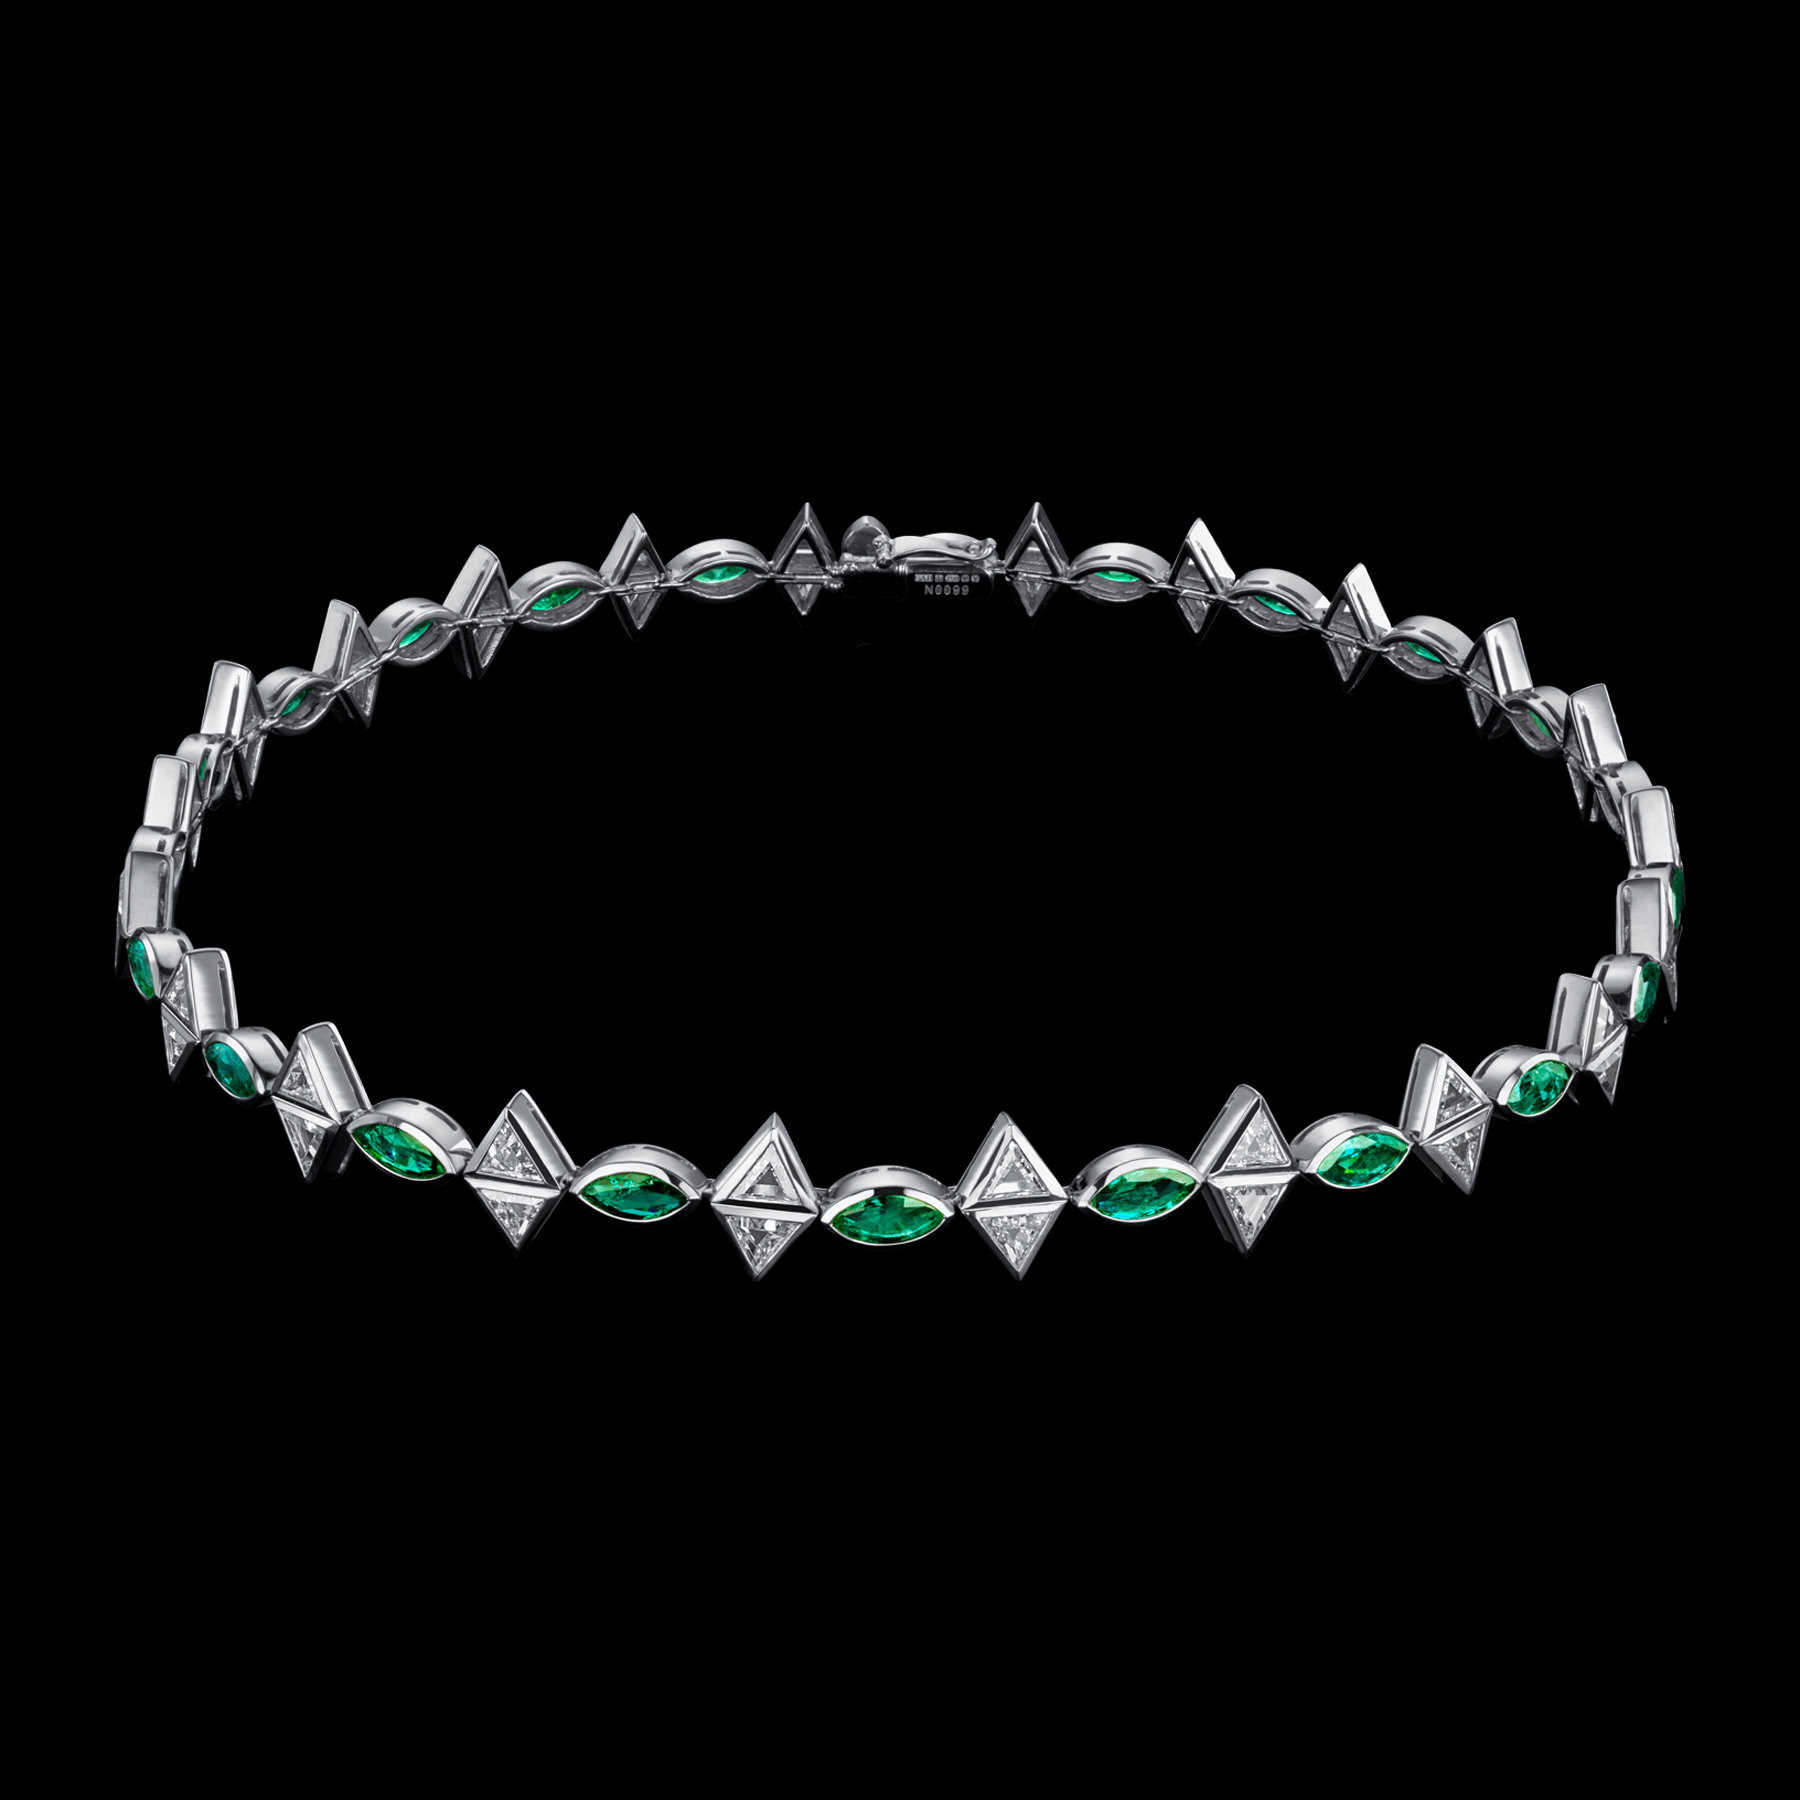 The Romantic Necklace by designer Solange Azagury-Partridge - Blackened 18 carat White Gold and Emeralds & Diamonds - front view 0